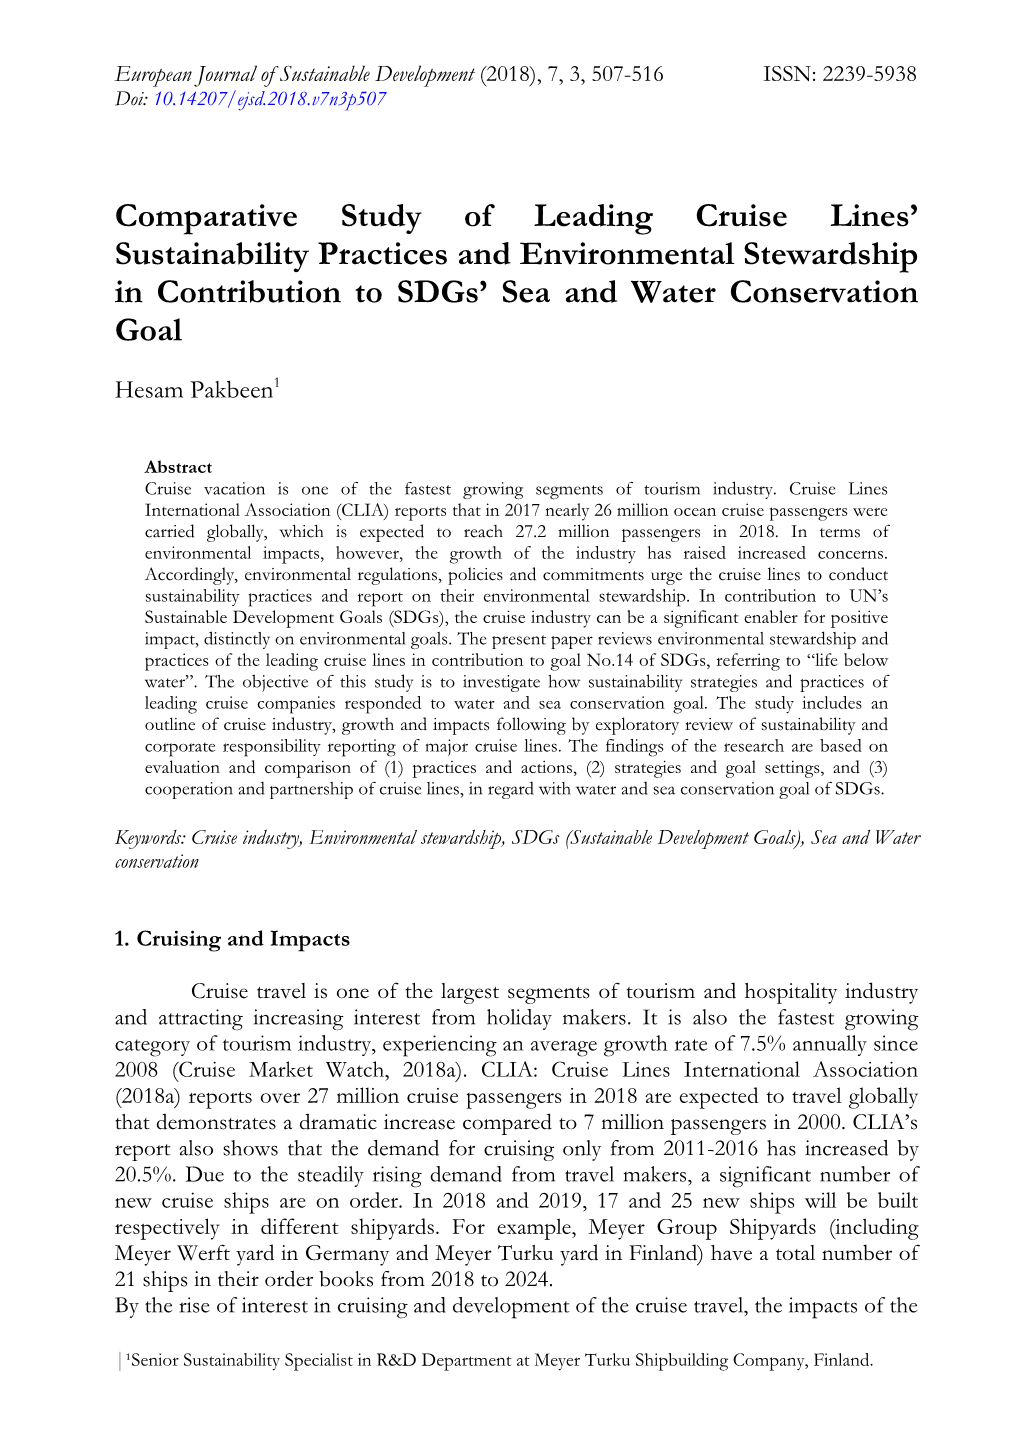 Comparative Study of Leading Cruise Lines' Sustainability Practices And